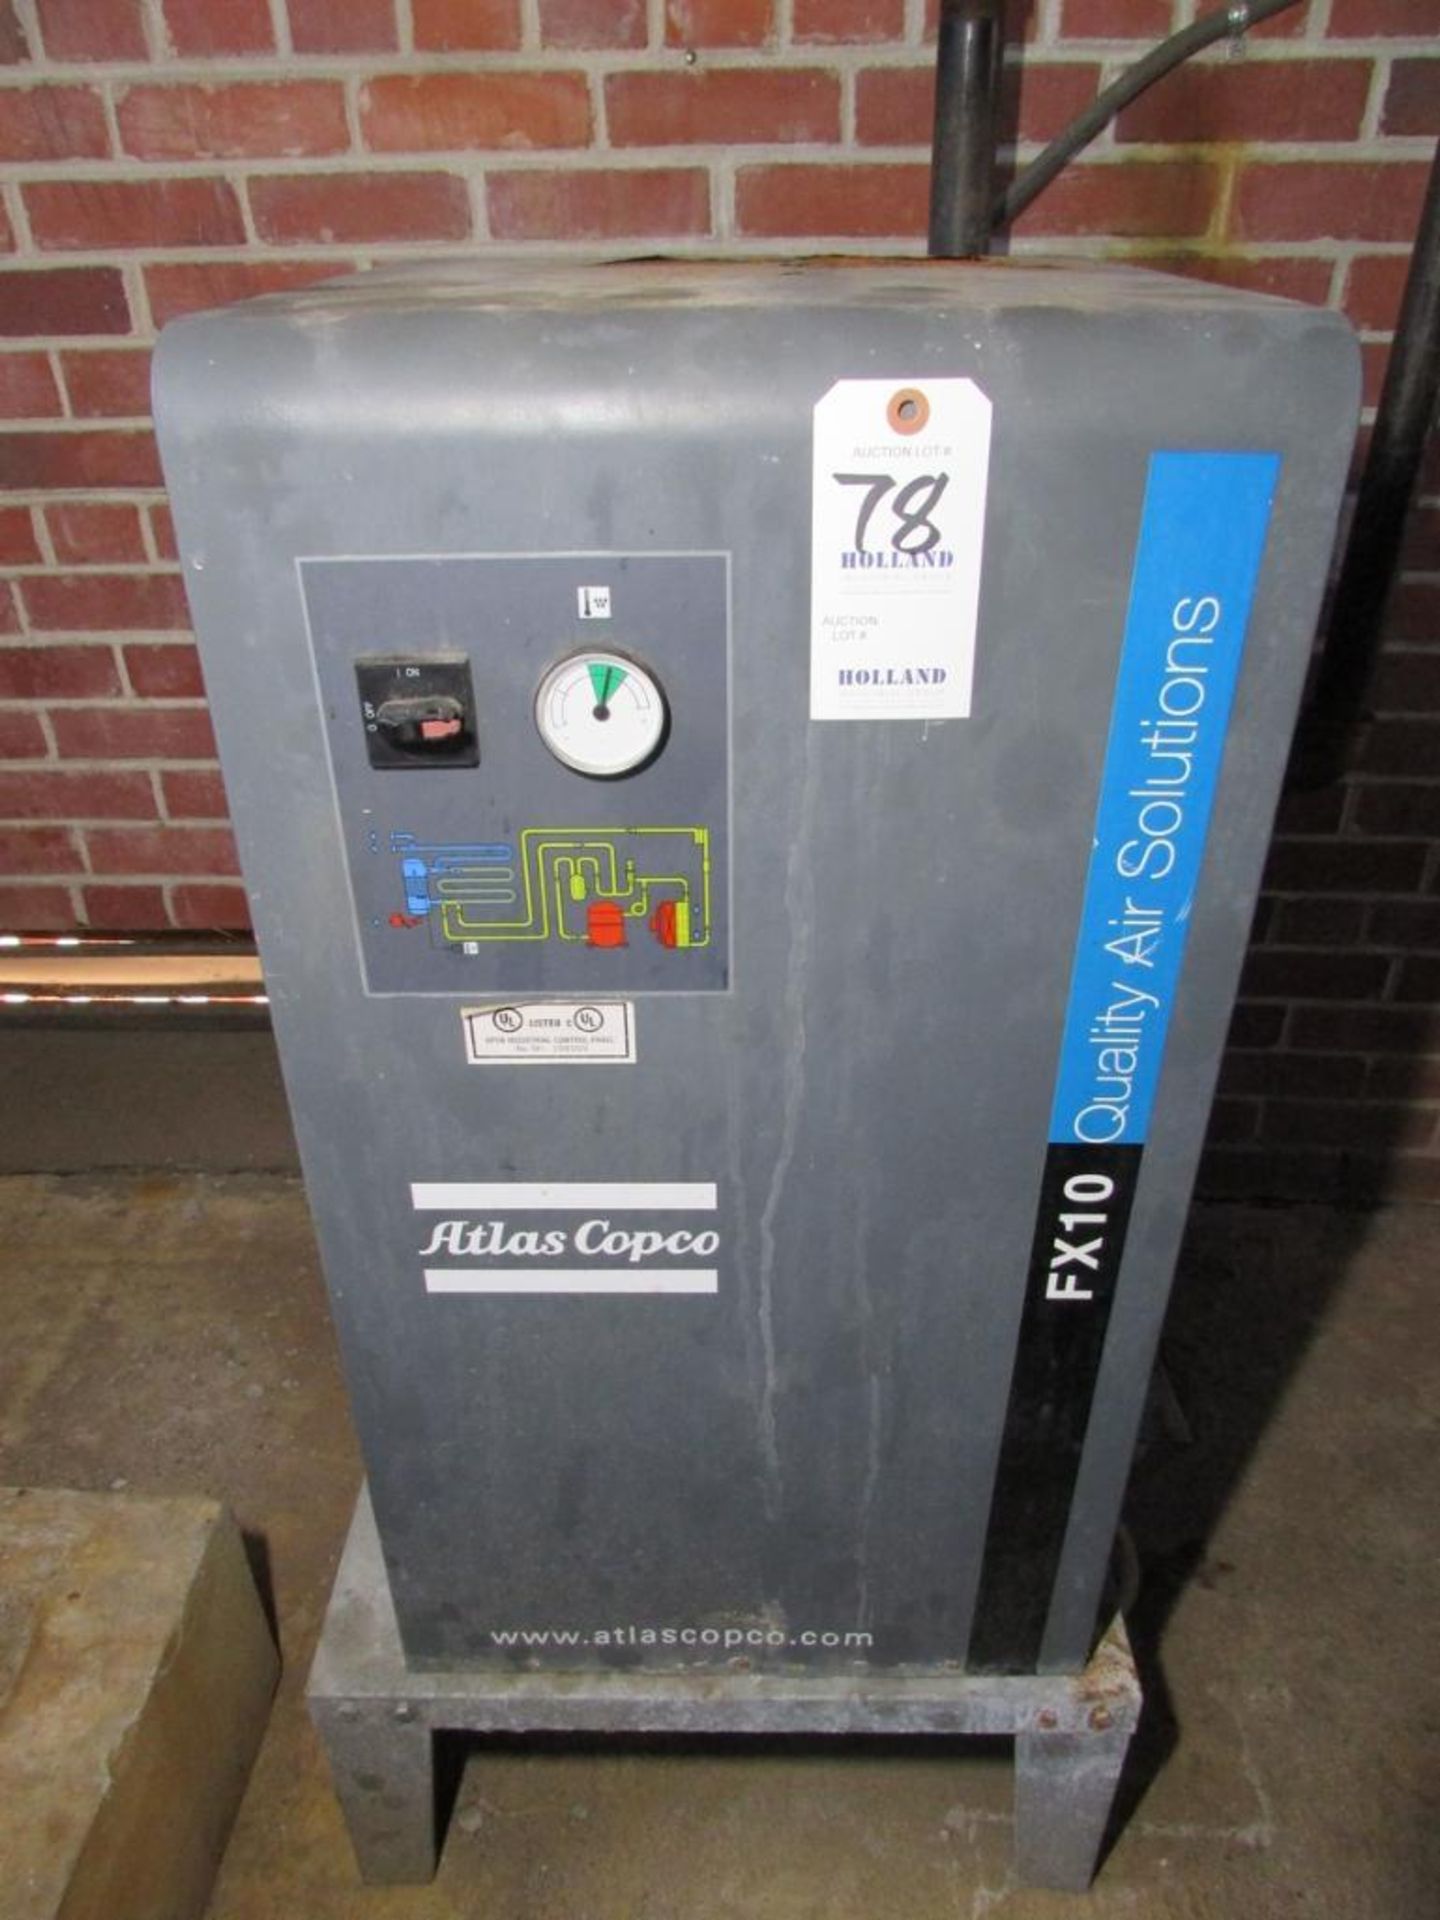 Atlas Copco FX10 A8 Refrigerated Air Dryer - Image 2 of 6